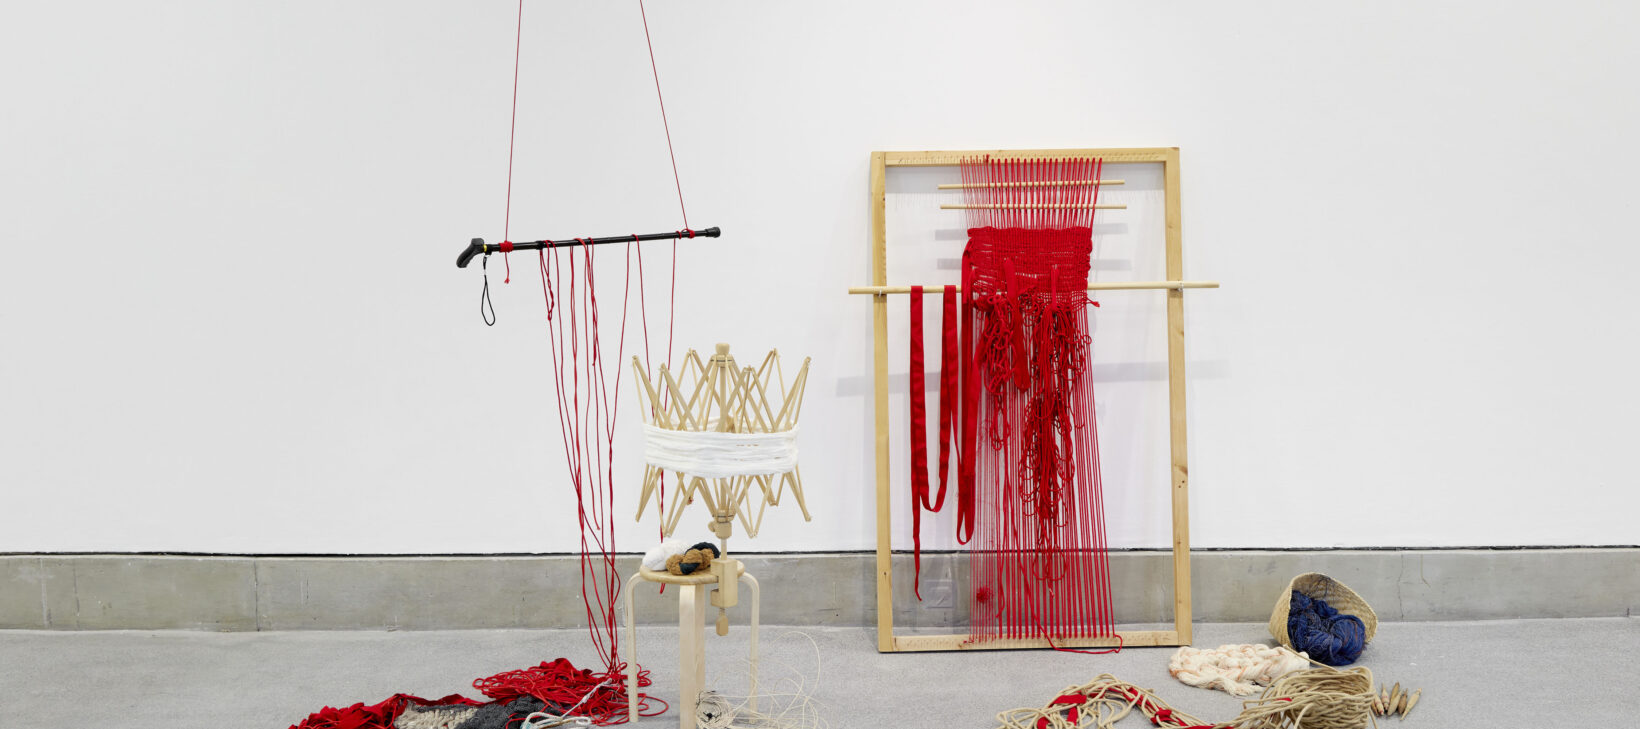 Image shows Raisa Kabir's art instillation. A wooden structure with red cloth, hanging down. To the left is a walking stick suspended by red cloth and ropes run along the floor.